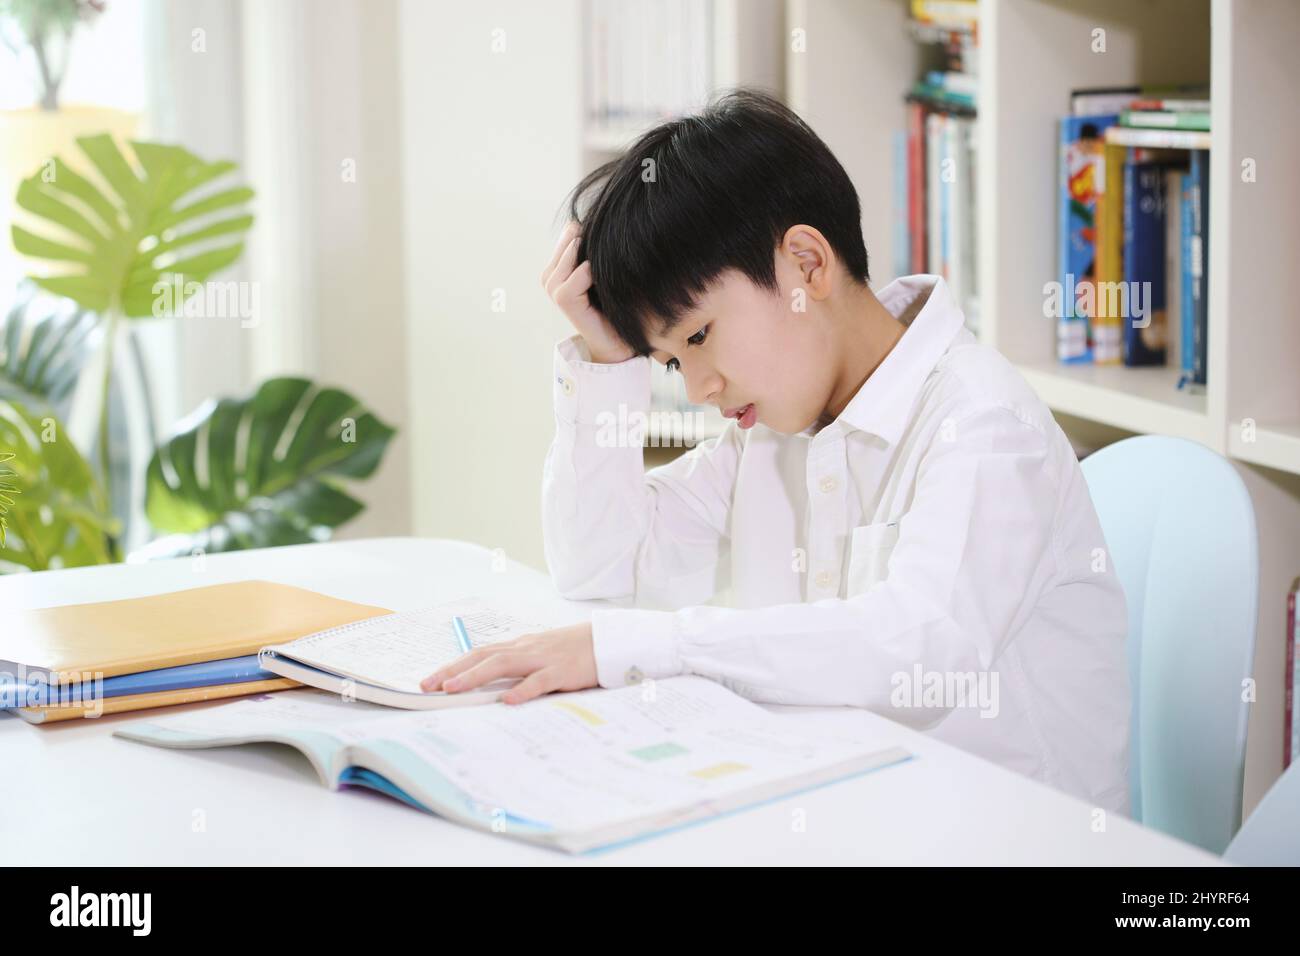 A child who is tired of the piled up of school homework and tedious study is learning by solving difficult problems with a tired look. Stock Photo